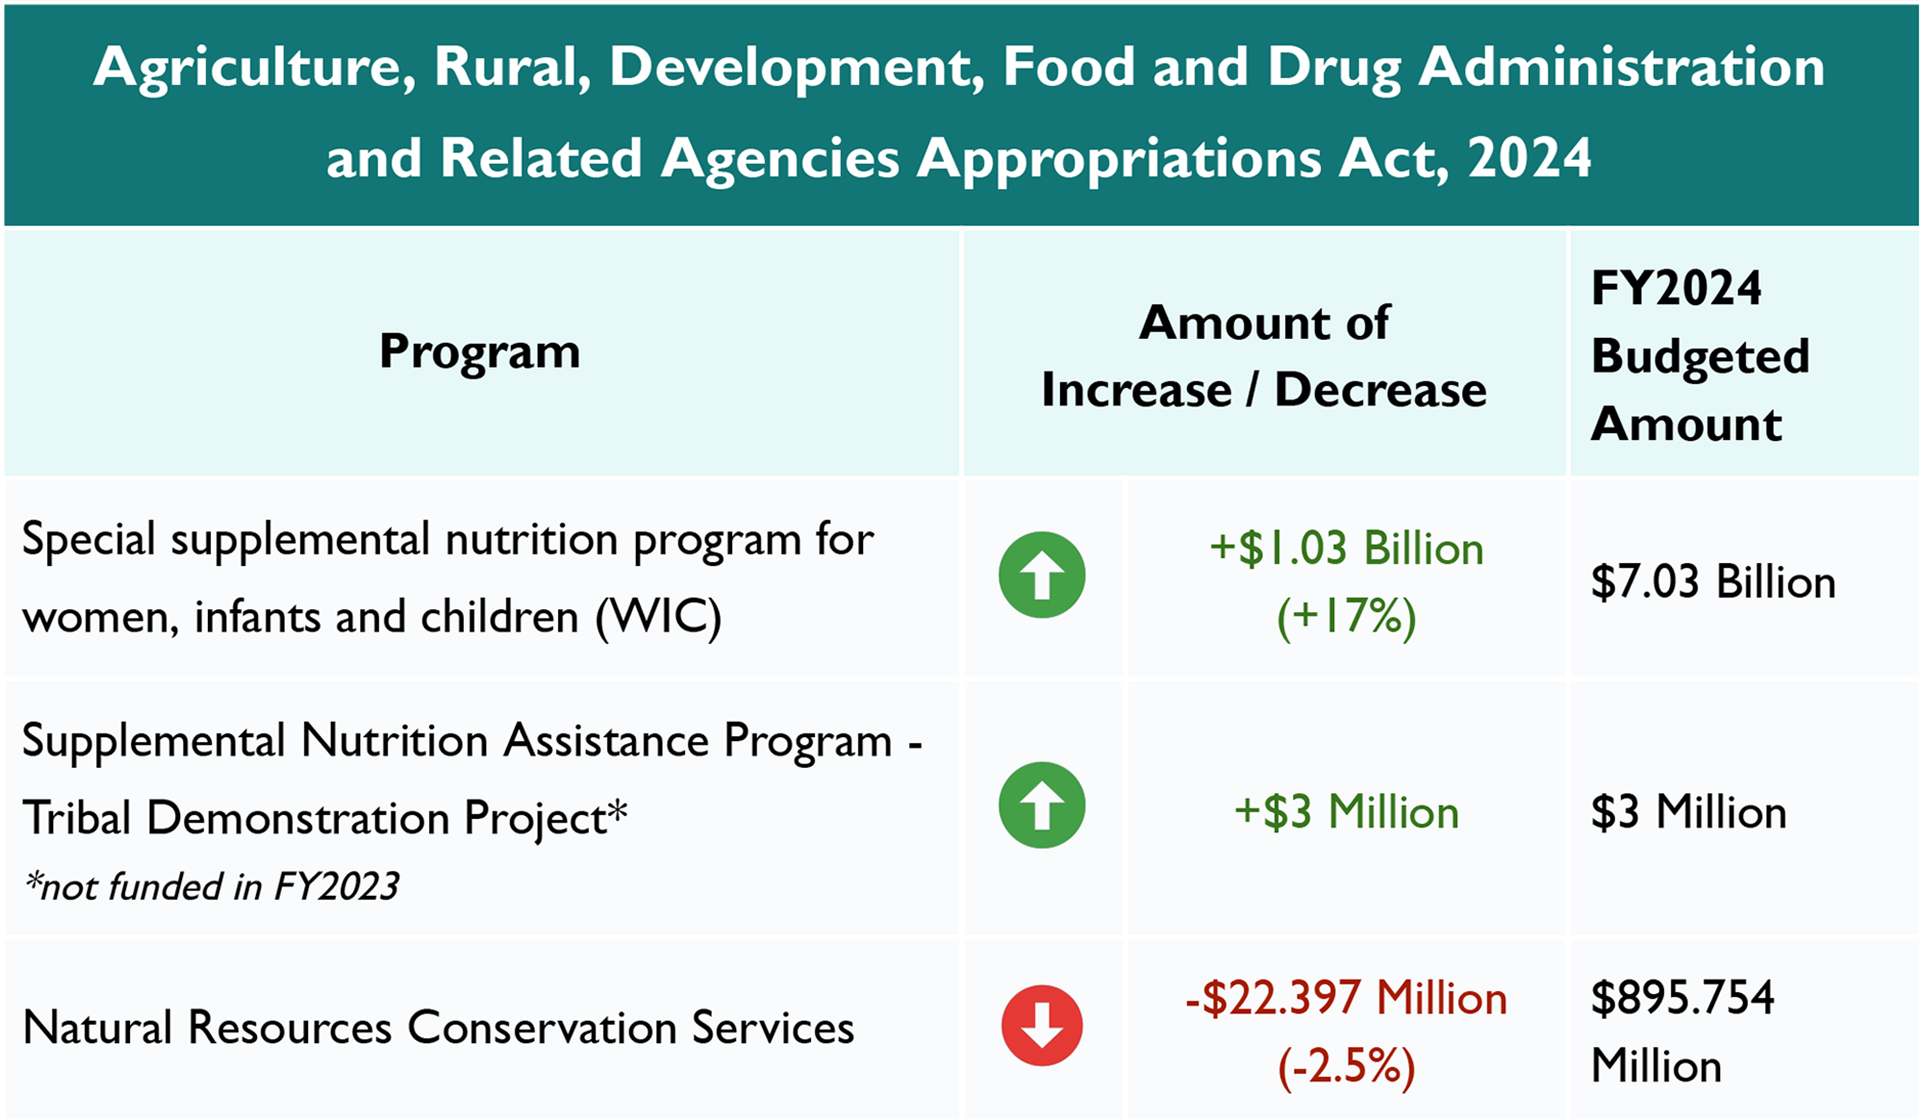 Agriculture, Rural, Development, Food and Drug Administration and Related Agencies Appropriations Act, 2024